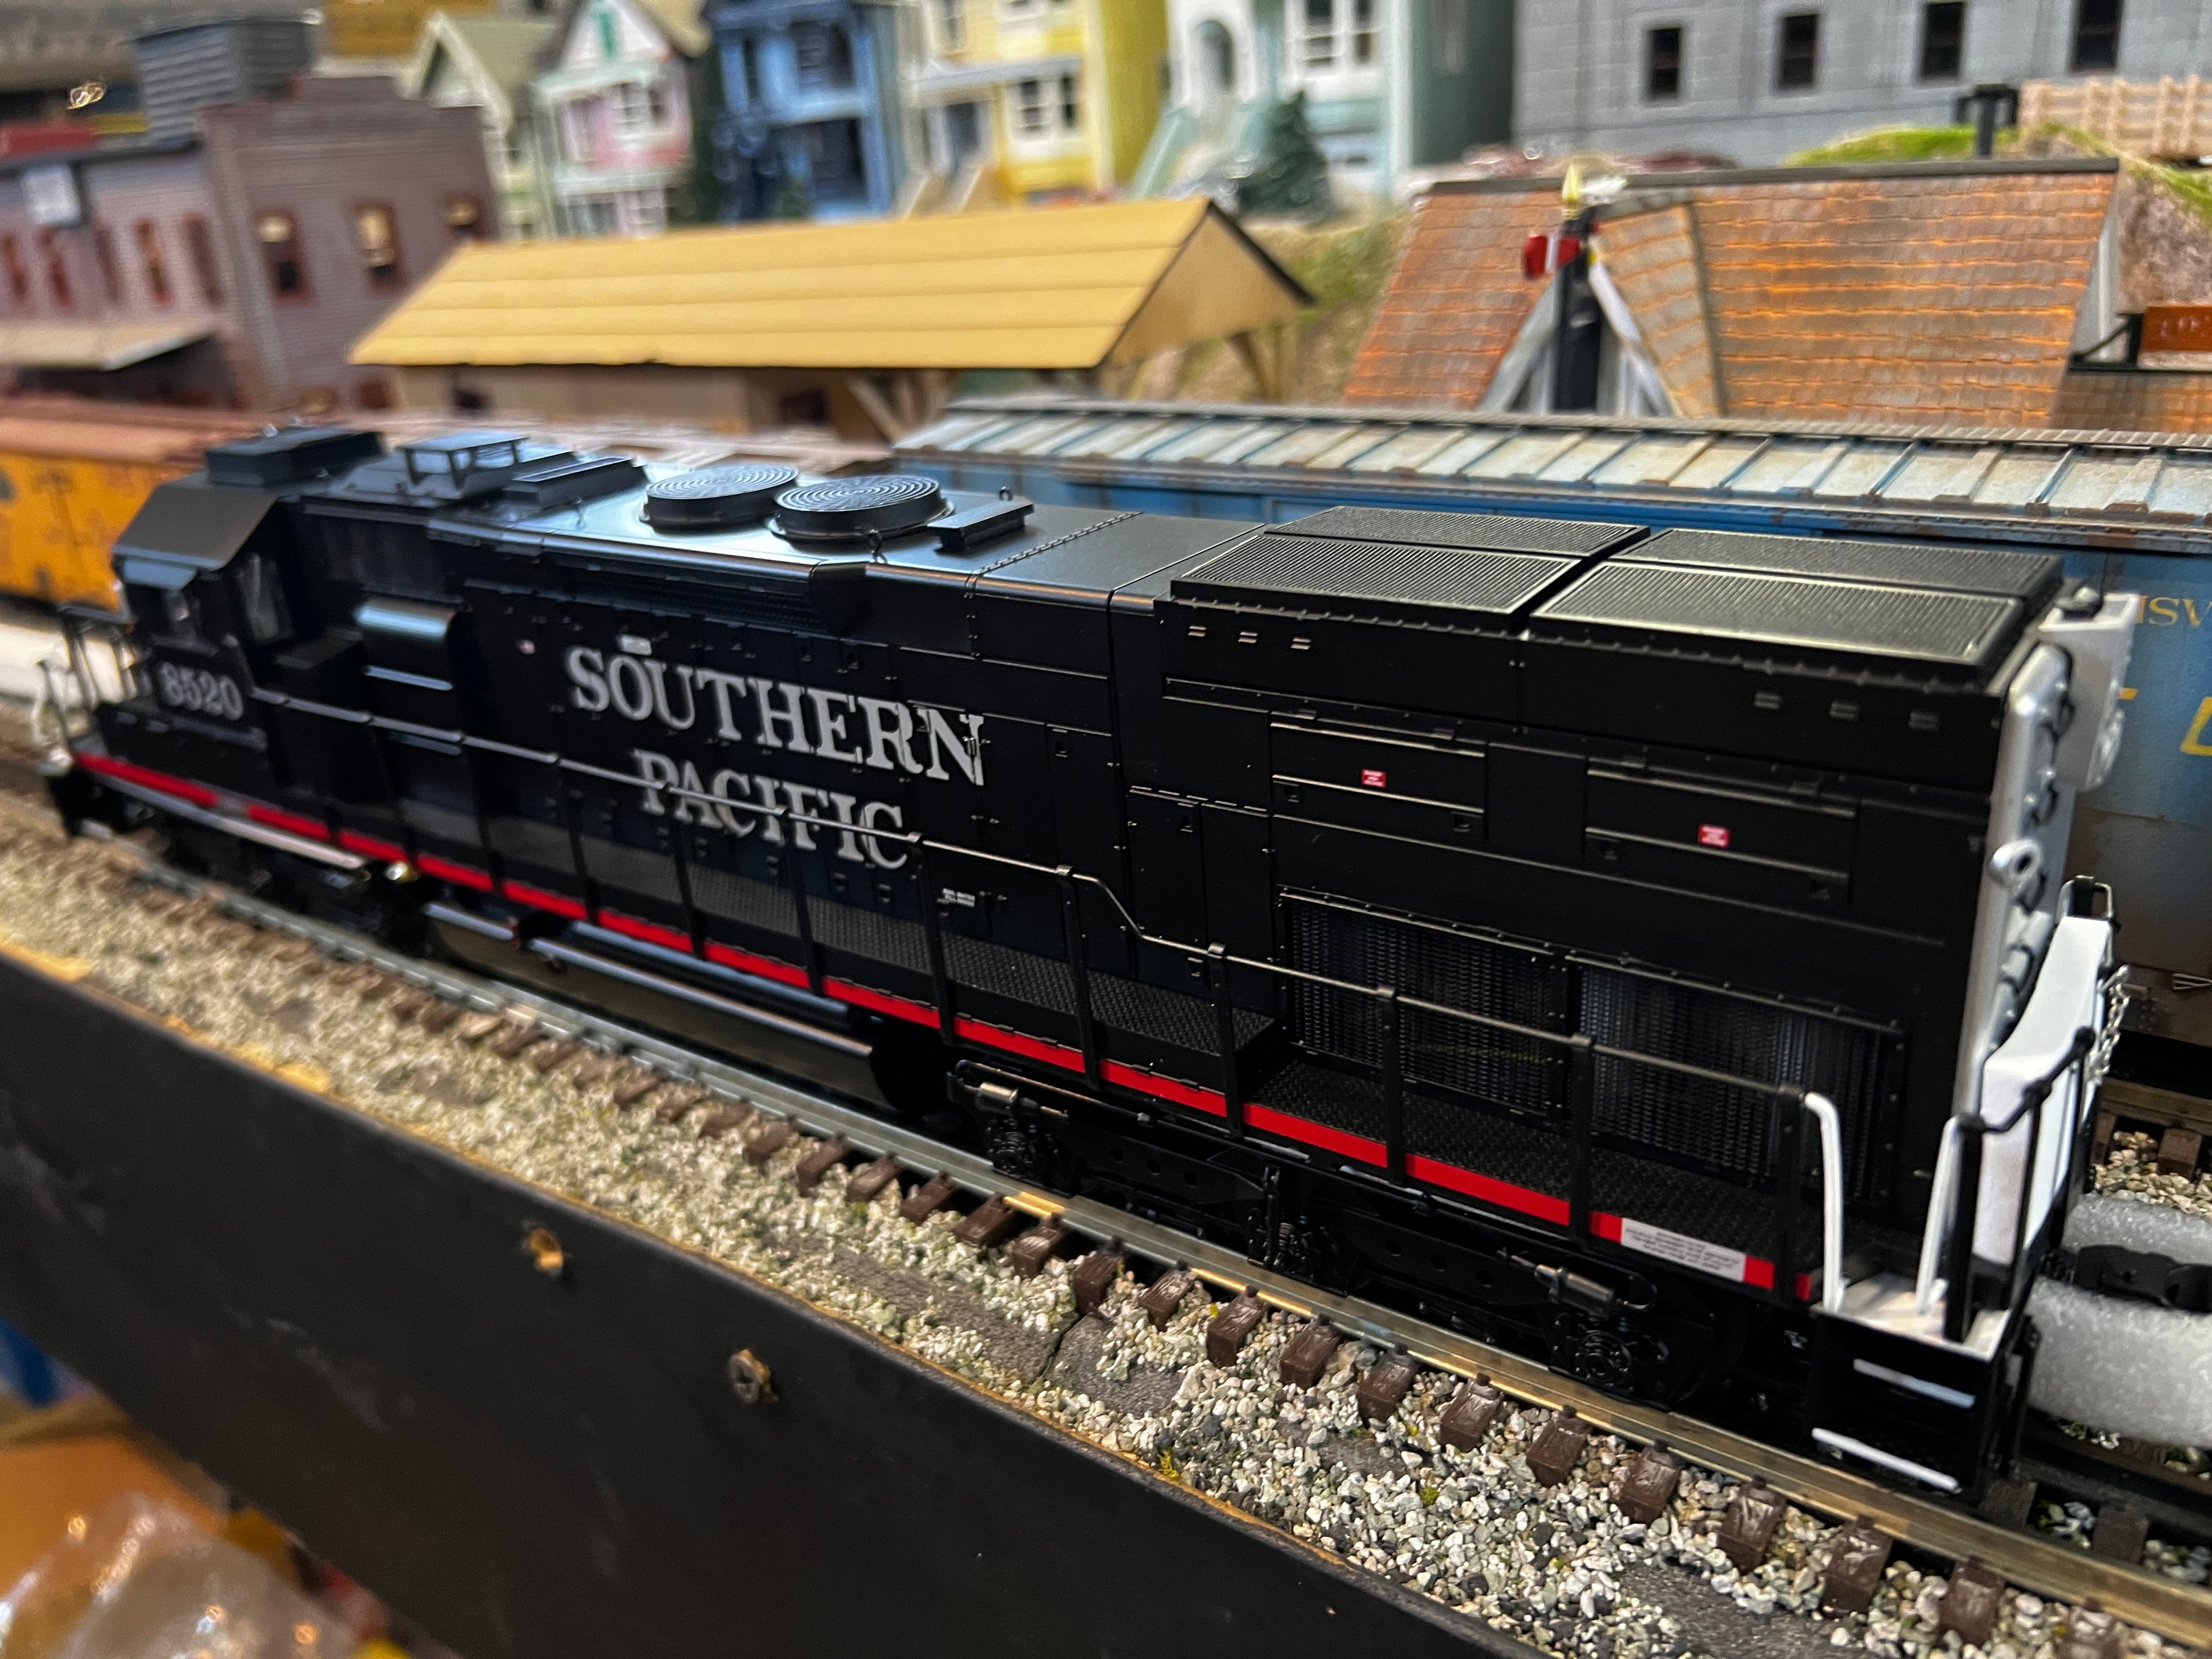 Lionel 2333411 - Legacy SD40T-2 Diesel Locomotive "Southern Pacific" #8520 (Black Widow)